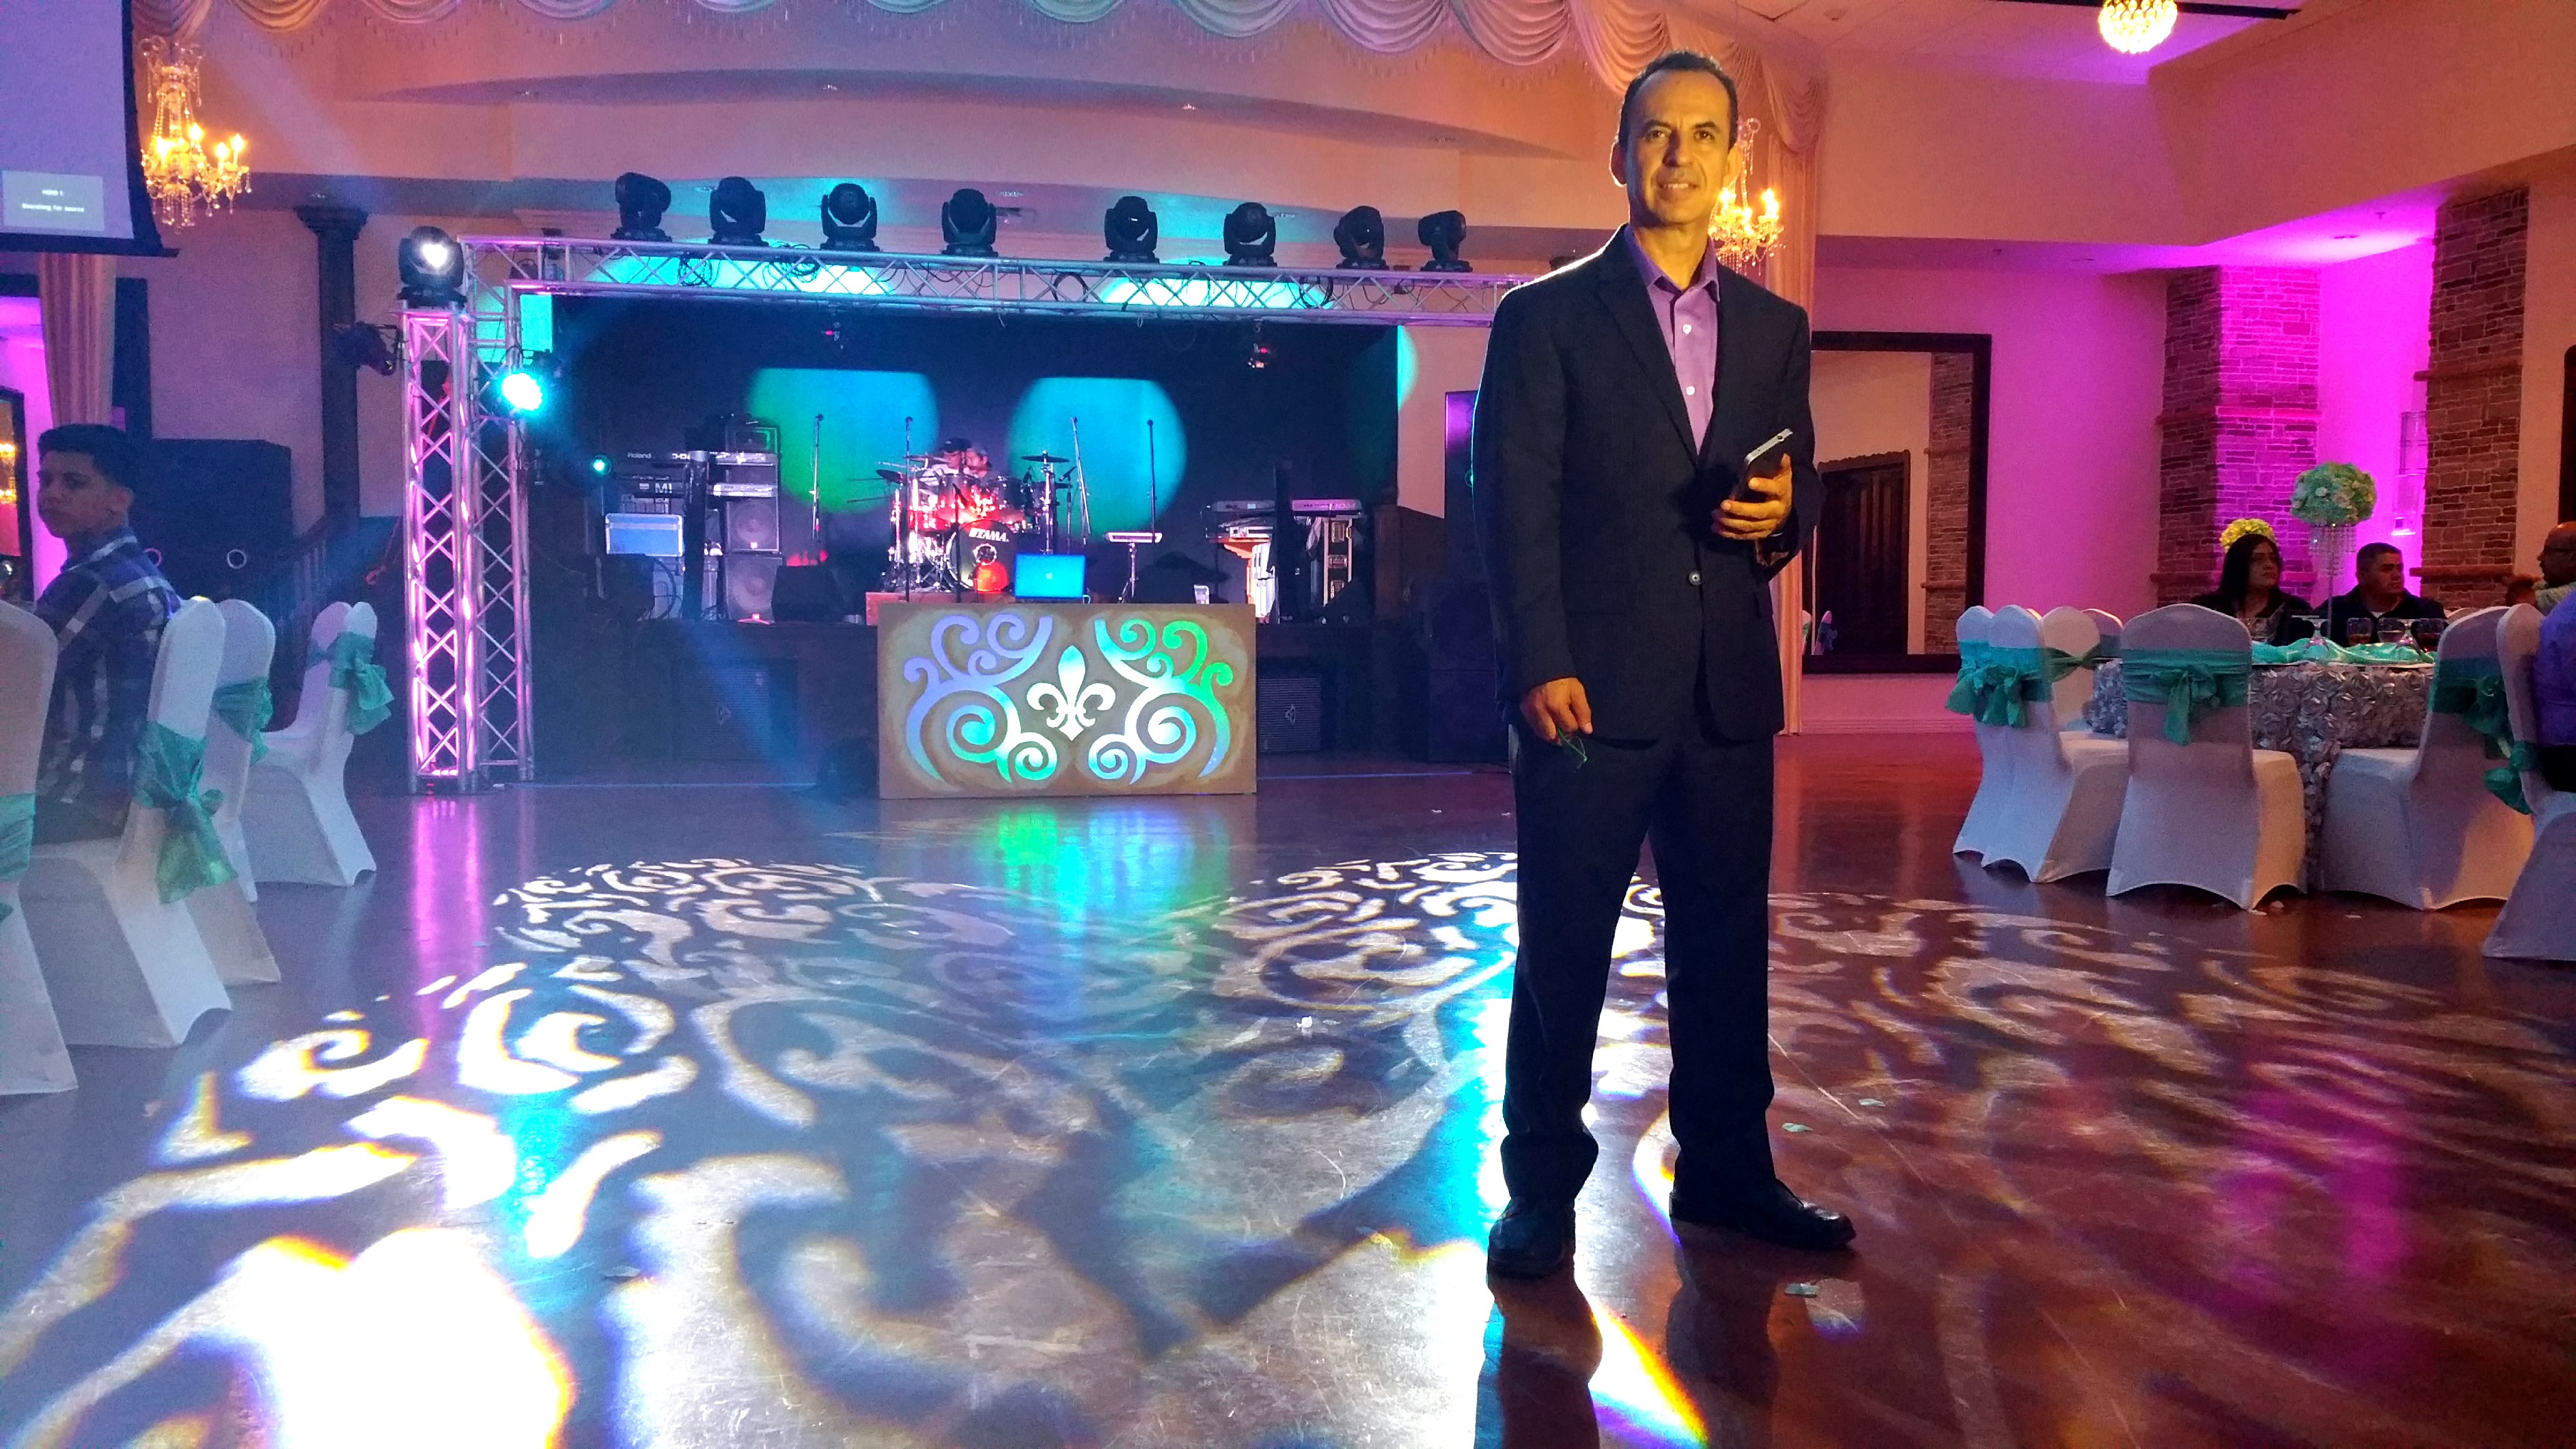 Hector LaRotta - Houston Memorable Events. HD Video, DJ Entertainment and EMCEE, Decor Lighting and Photo Booth